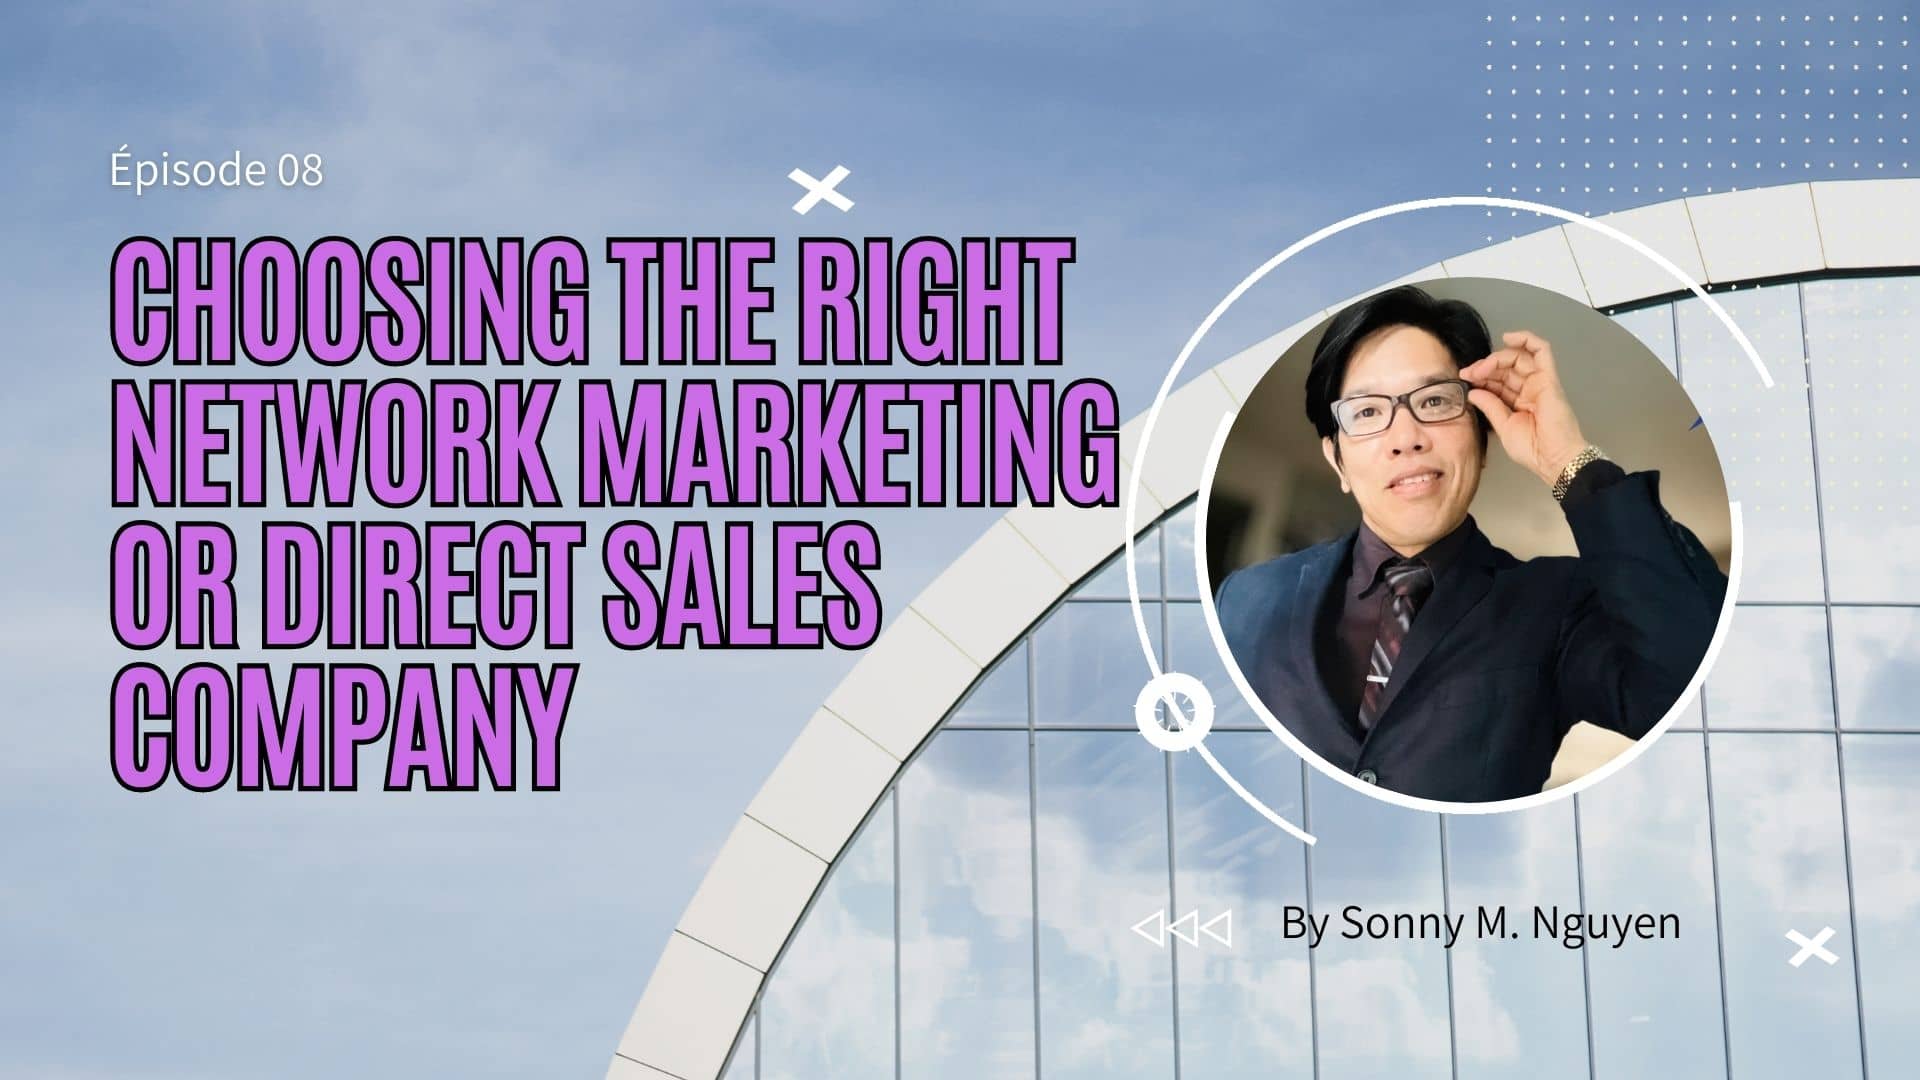 Épisode 08 | Choosing The Right Network Marketing or Direct Sales Company